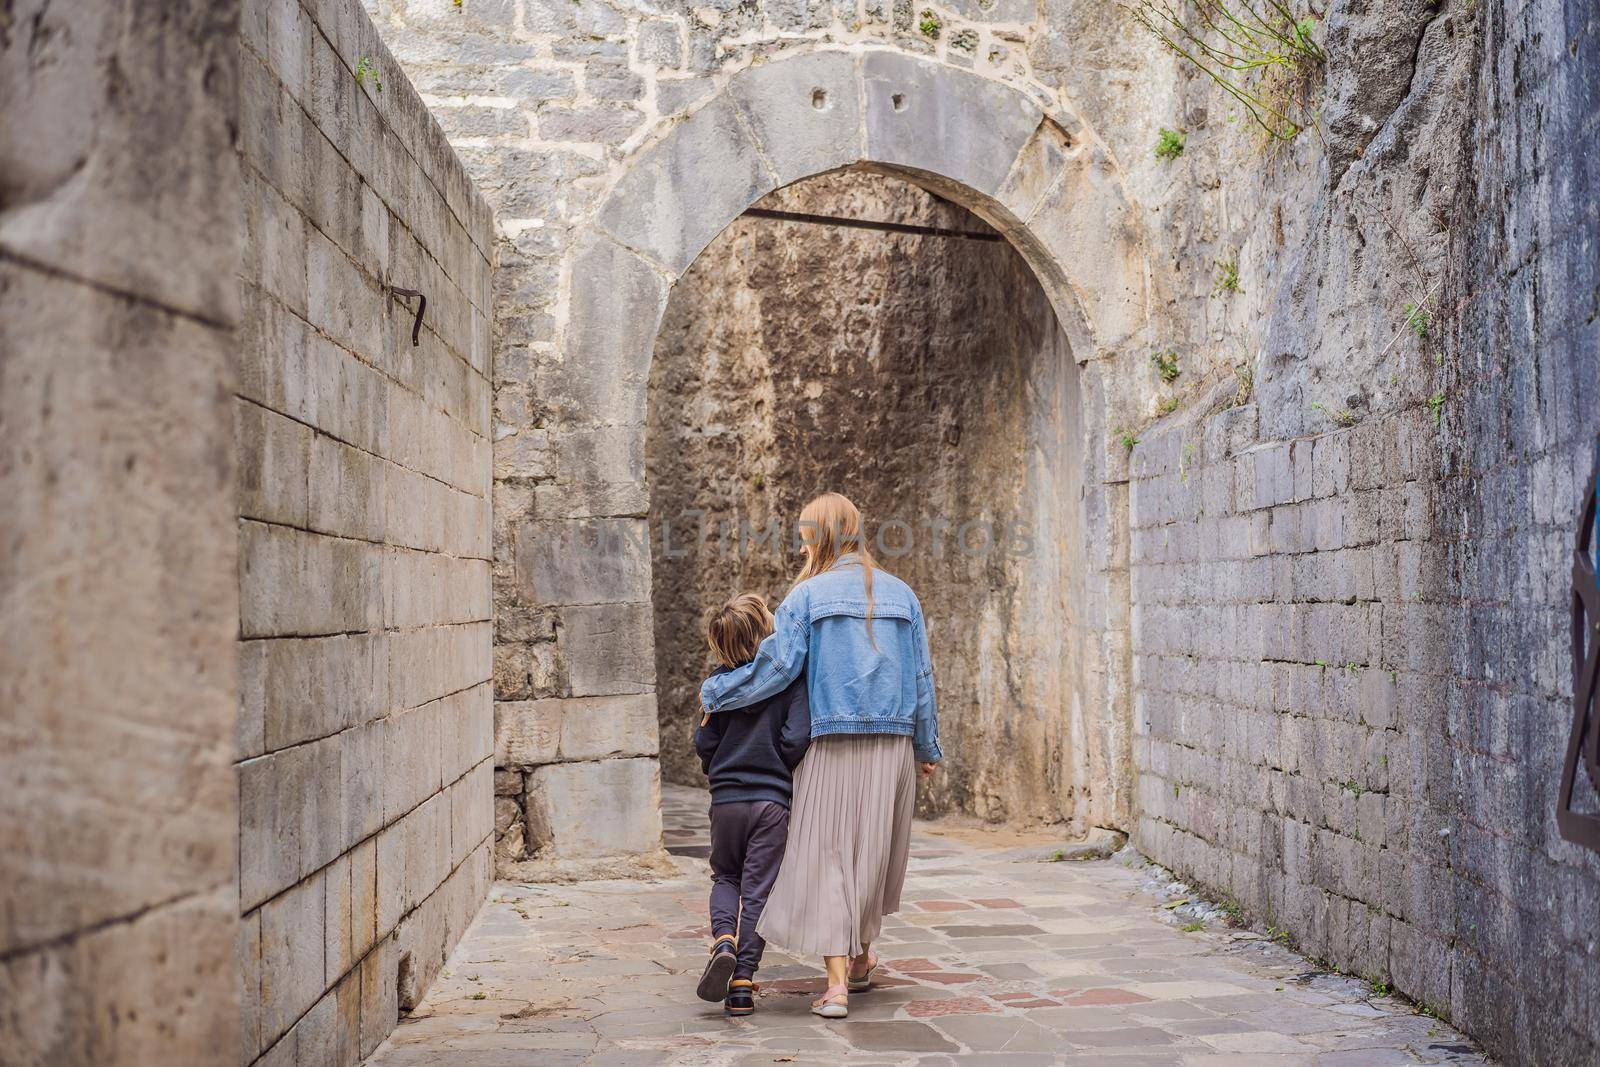 Mom and son travelers enjoying Colorful street in Old town of Kotor on a sunny day, Montenegro. Travel to Montenegro concept.